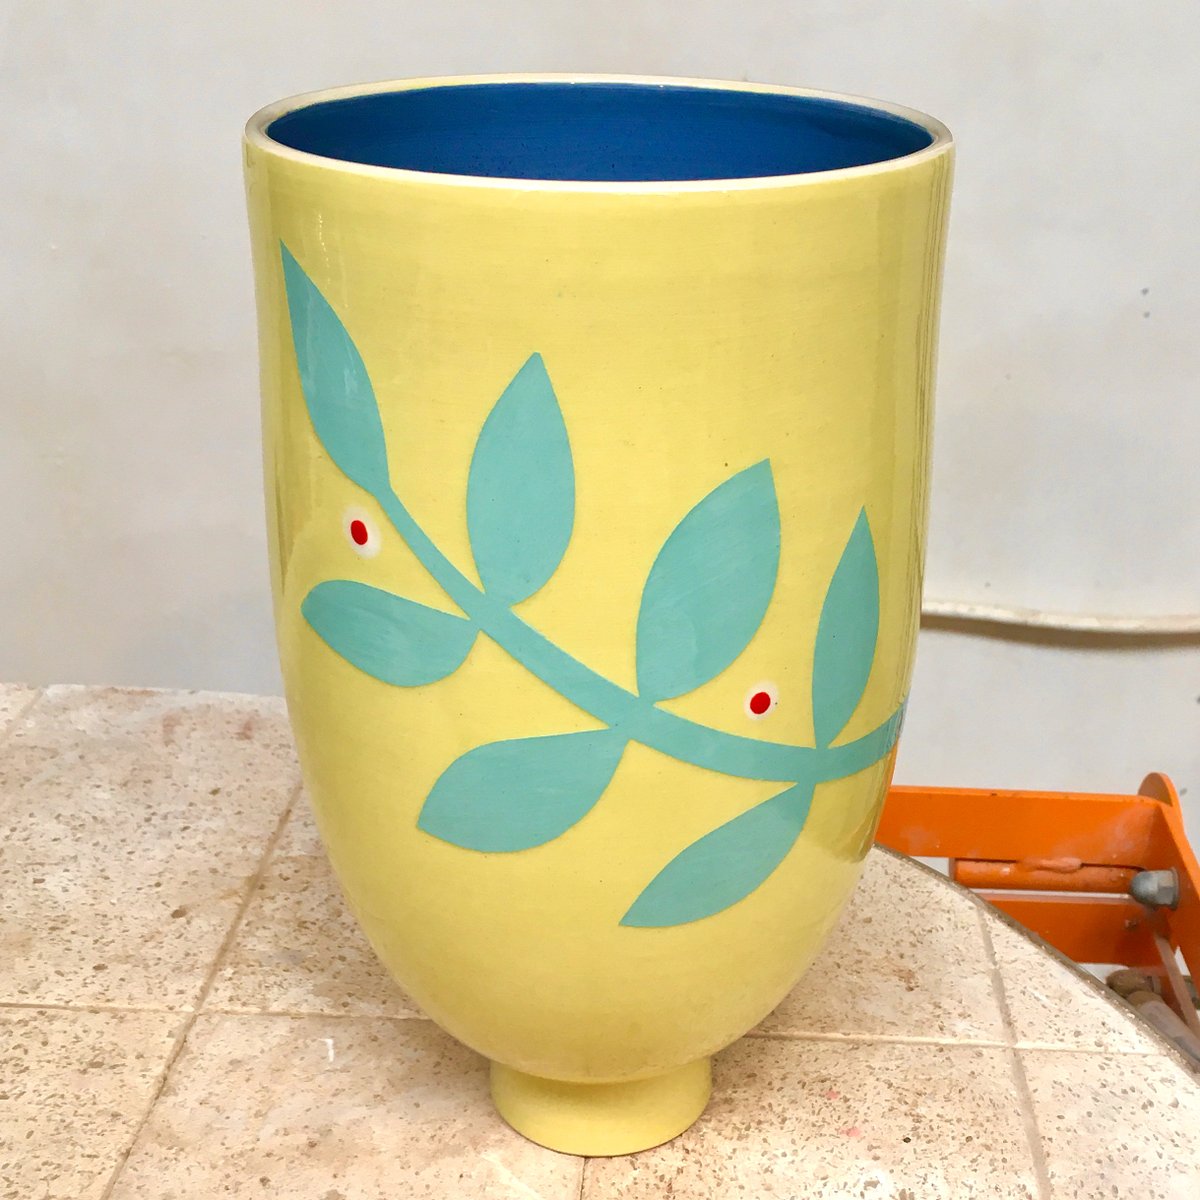 As part of #GreatCharityPotAndPrintFair we created a charity prize draw for this pot to raise money for @RefSupDevon. We are delighted to say we raised £350 and picked the name of the winner Zoe out of the pot yesterday. Congrats Zoe and thanks to everyone who donated.🏺🏺